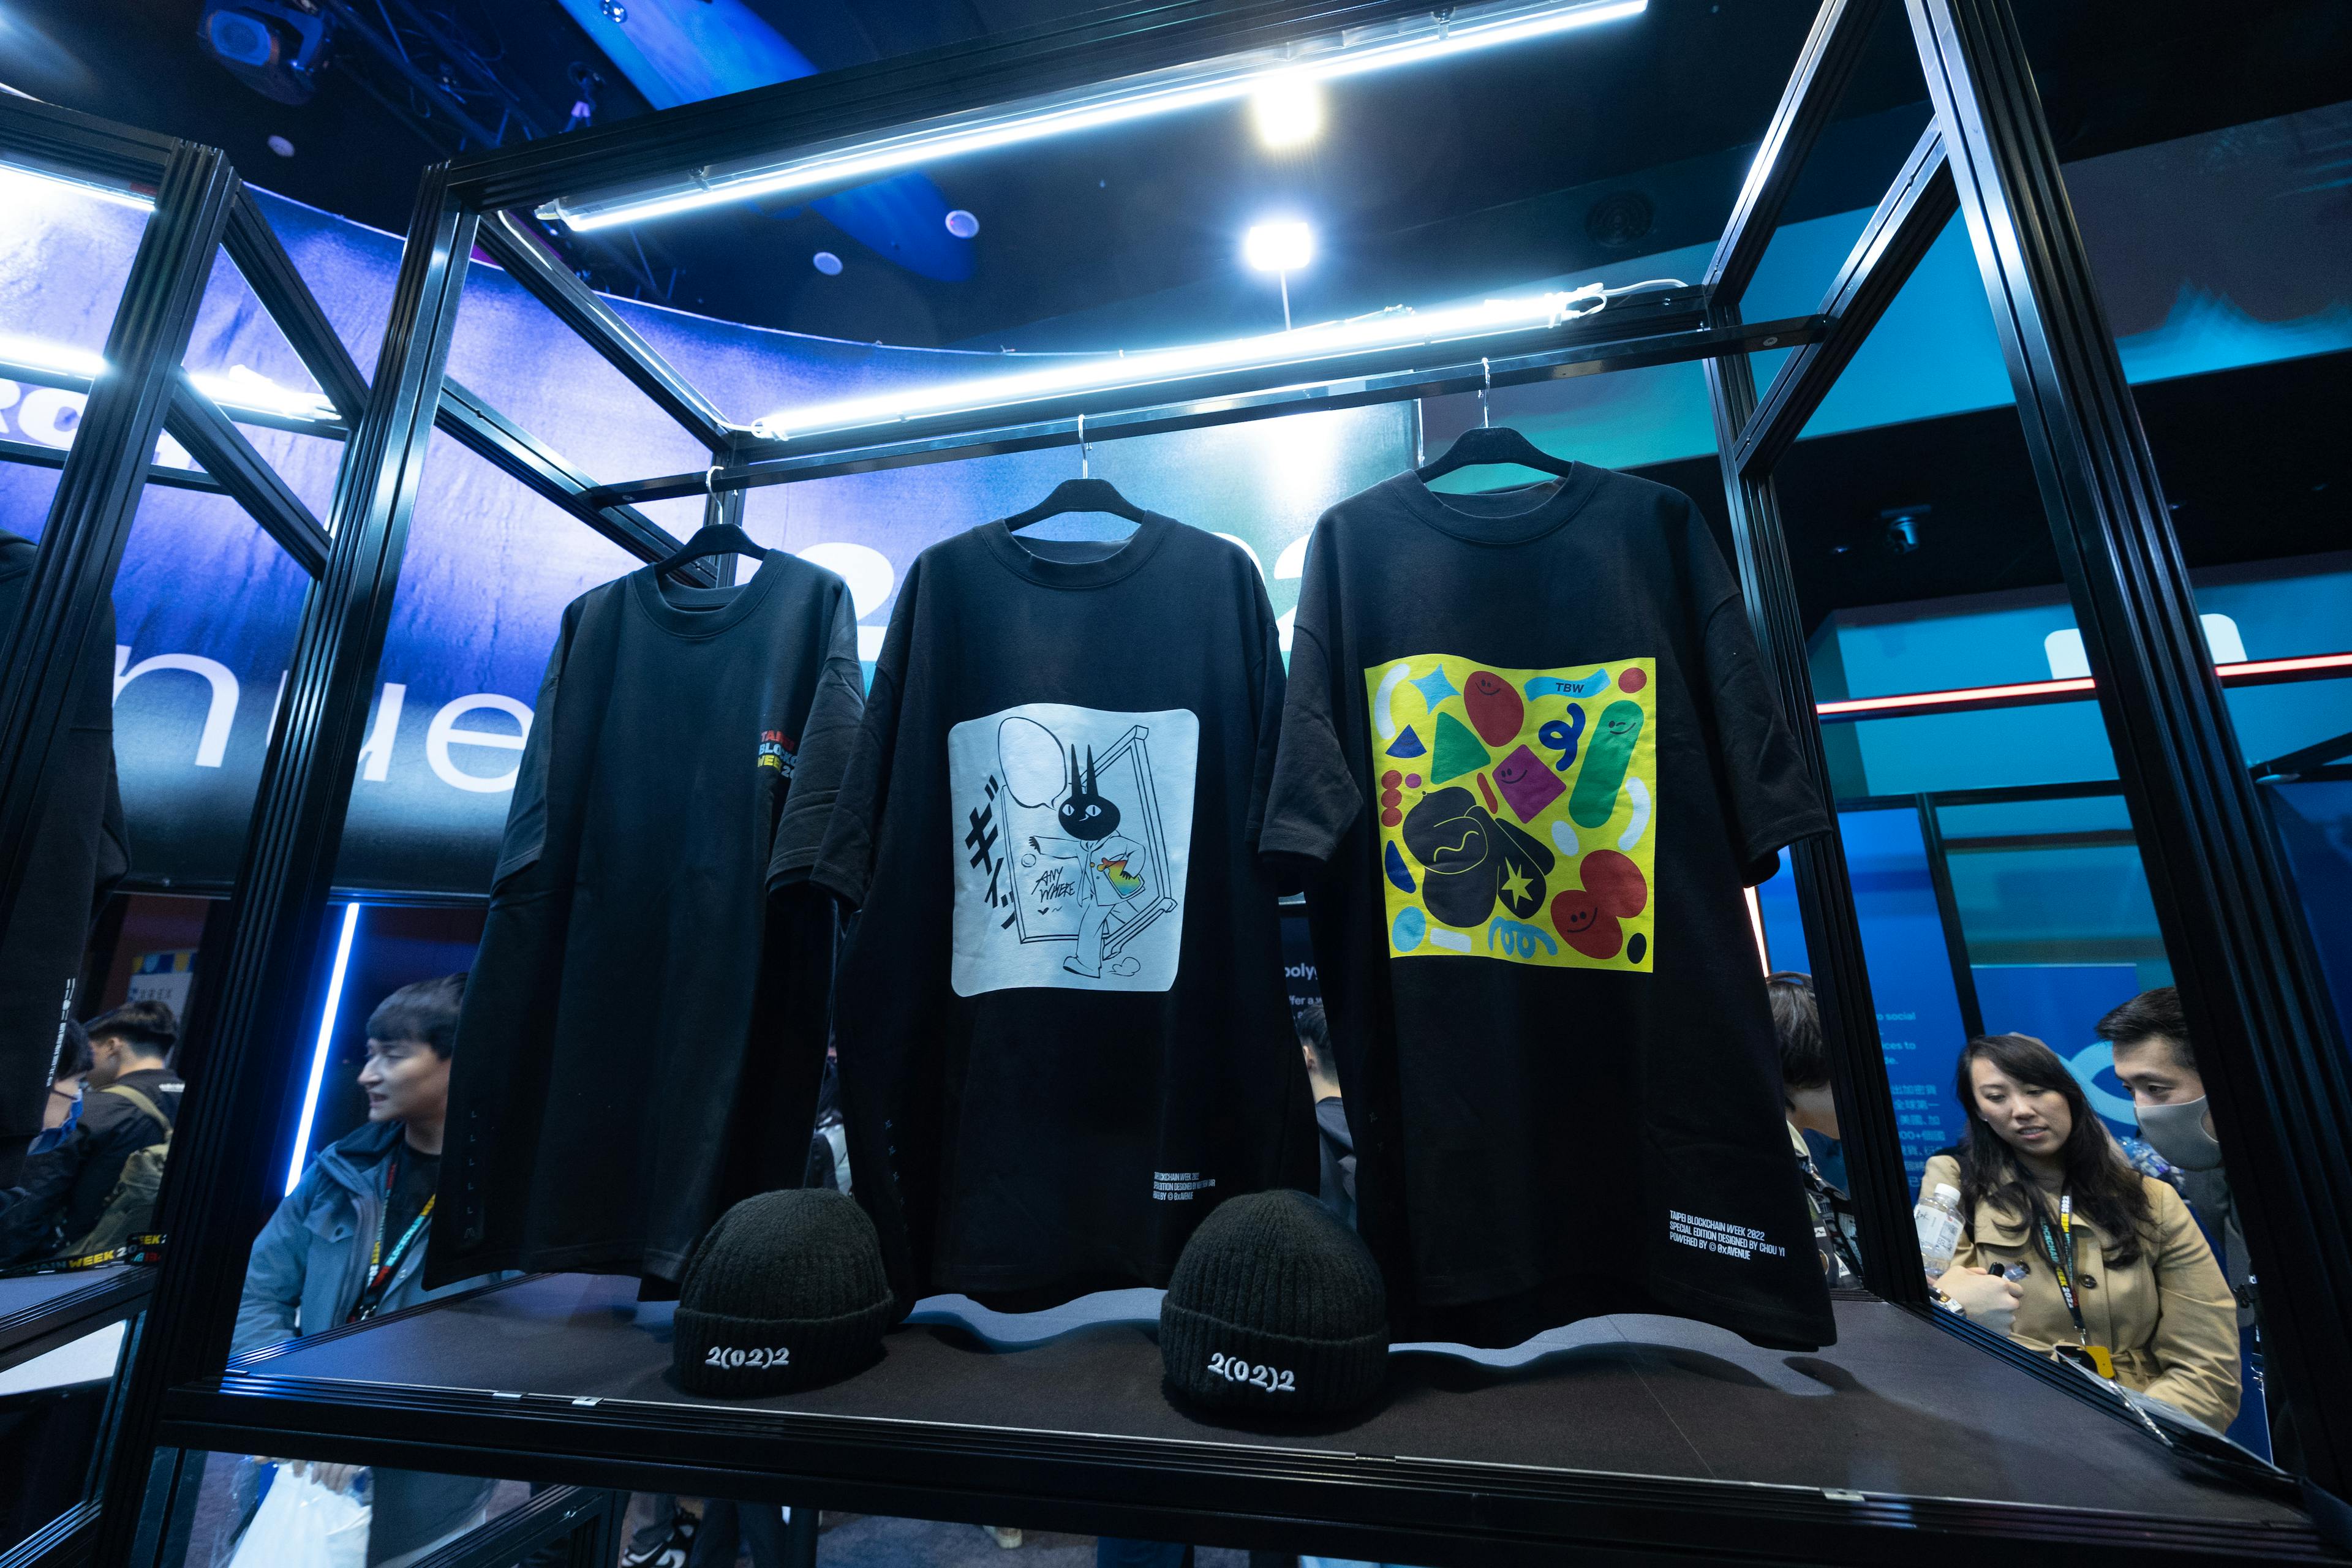 The merchandise at Taipei Blockchain Week featured rare tshirts printed with artwork by Taiwan artists.